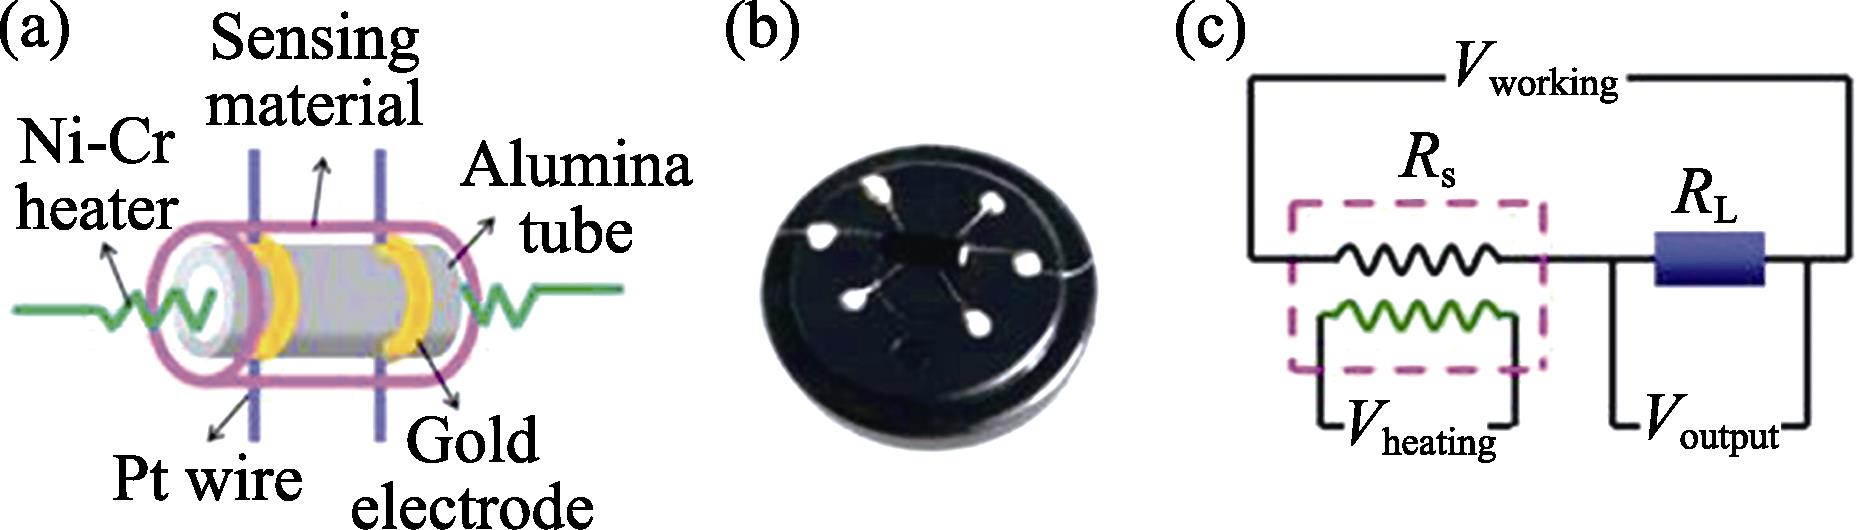 Structure schematic (a) and photo (b) of sample gas sensor real object, and the measurement electric circuit for the gas sensor (c)